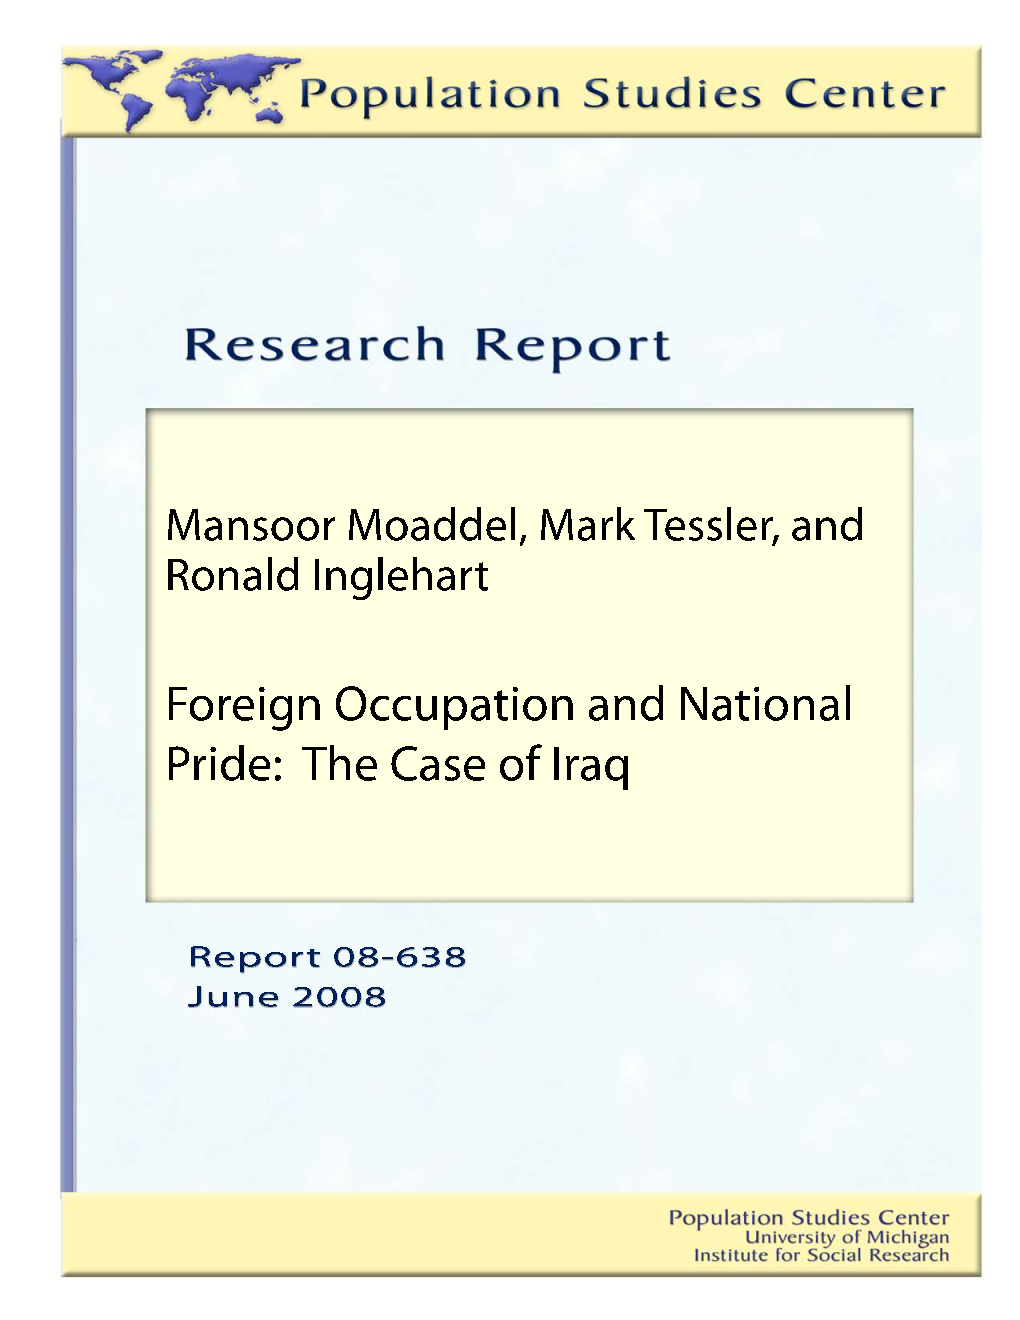 Foreign Occupation and National Pride, the Case of Iraq